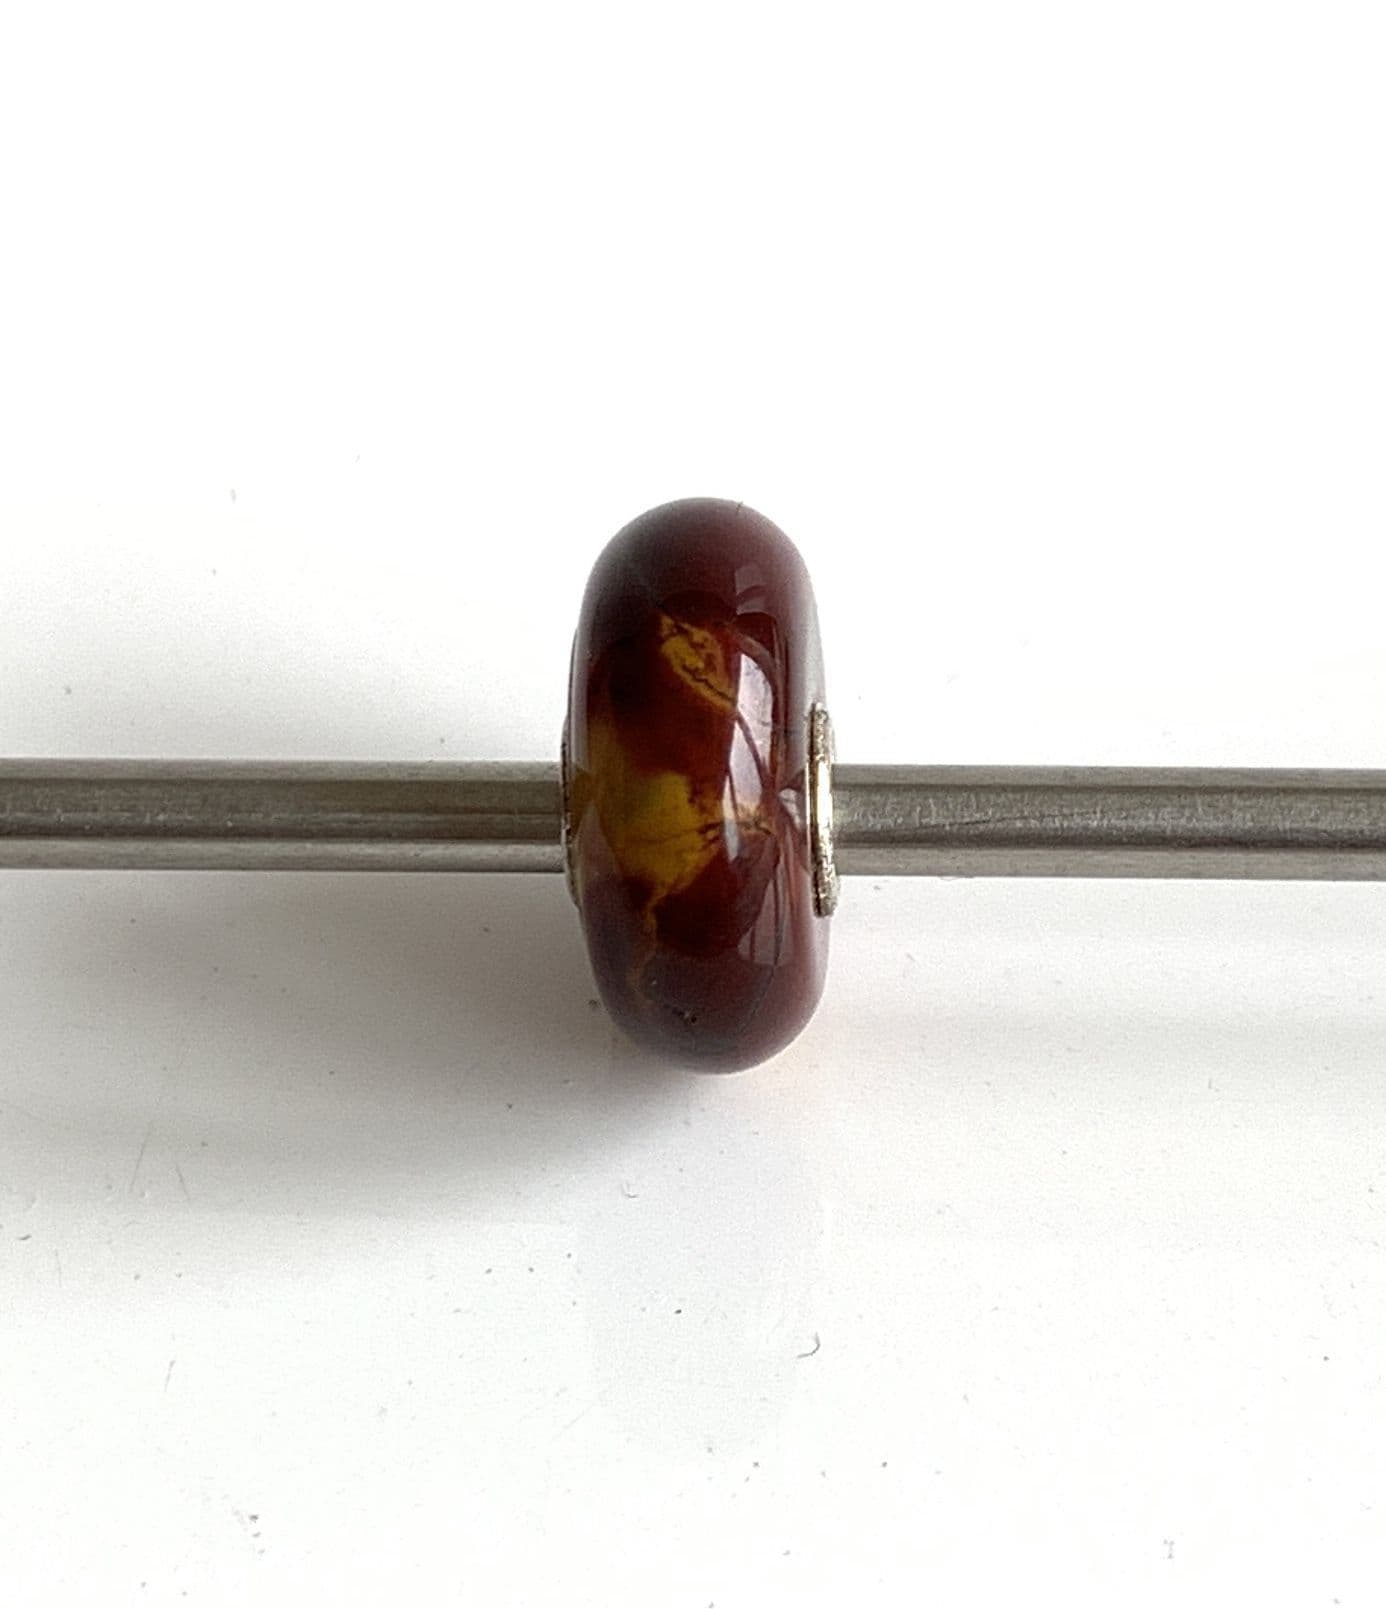 Reddy Brown Yellow Blemish Mookaite With White Flashes Trollbeads Bead